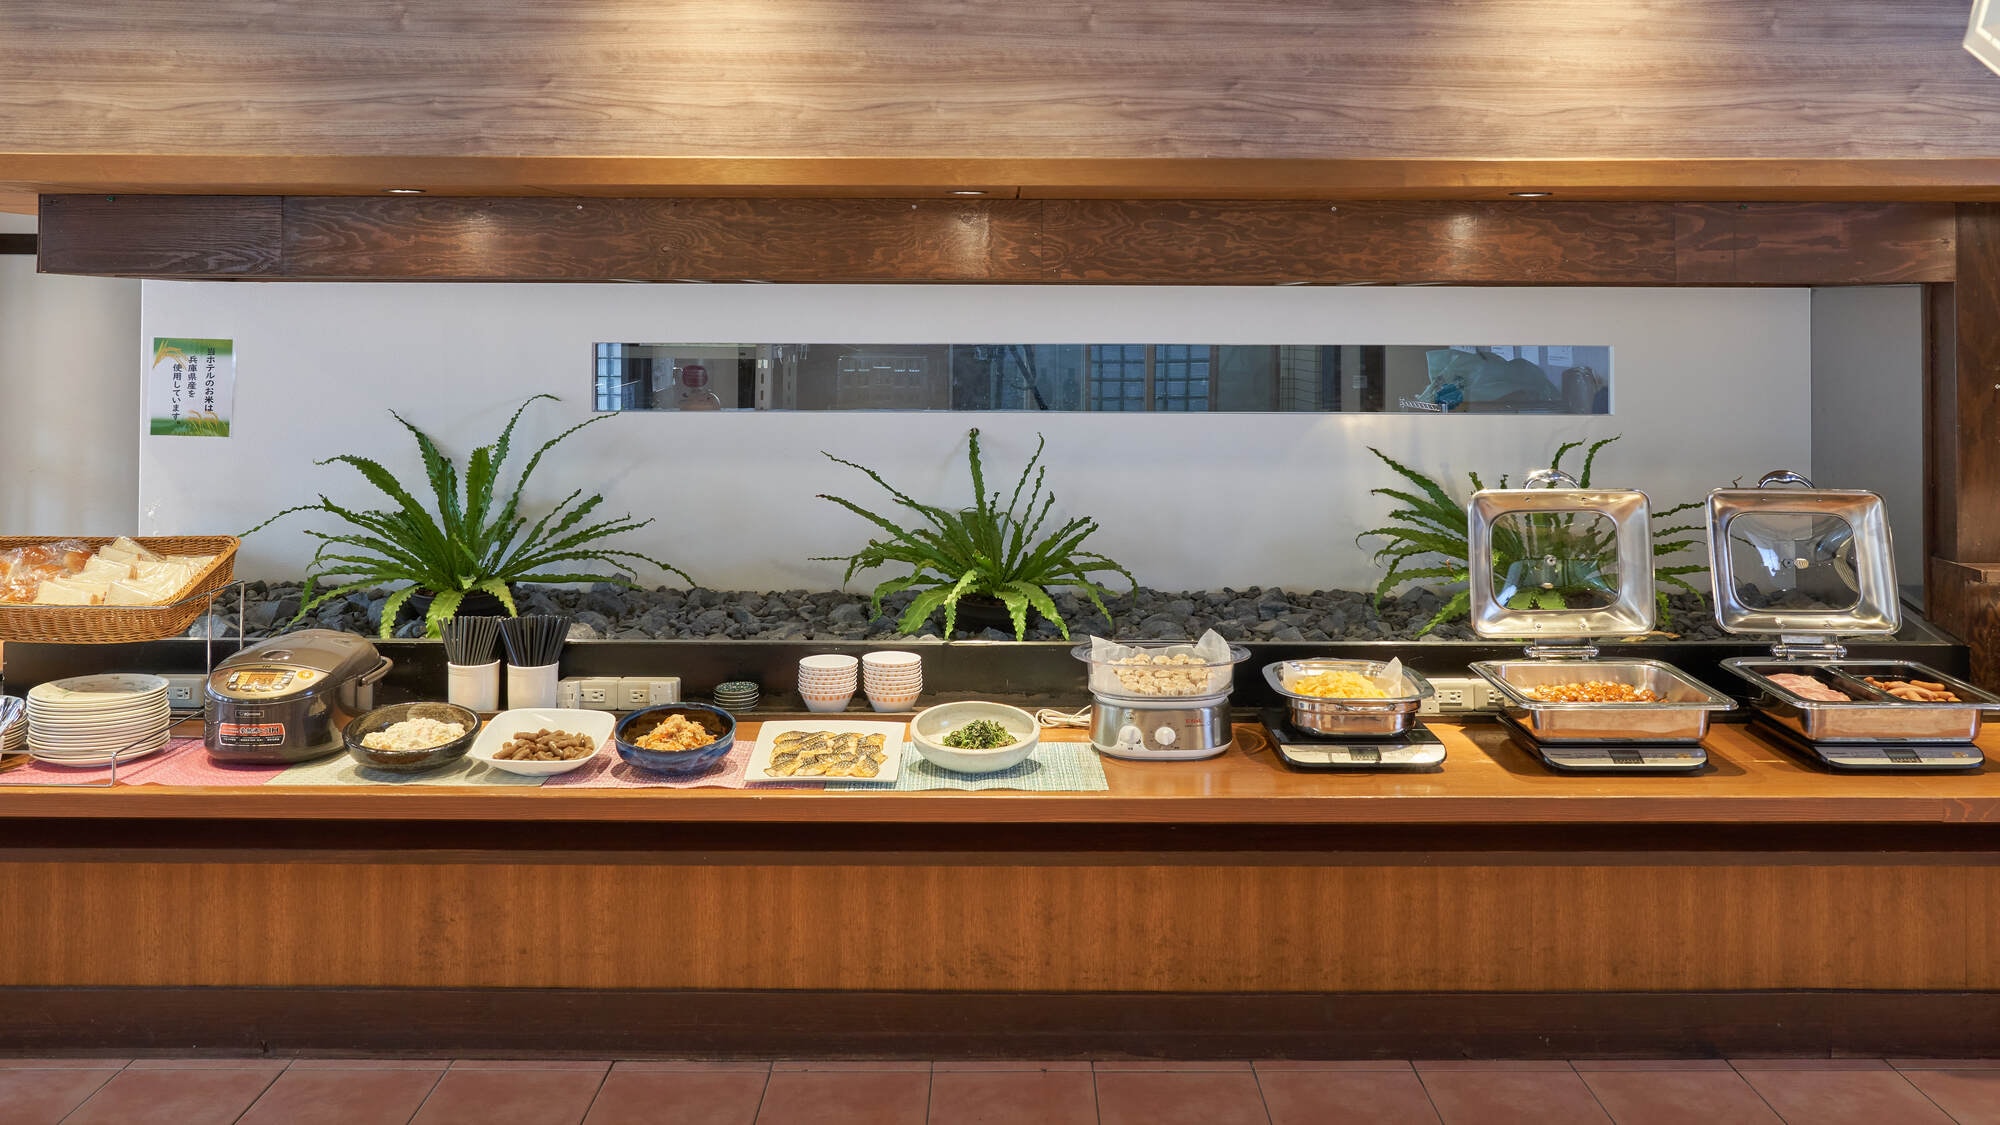 Breakfast | The buffet offers side dishes that change daily.